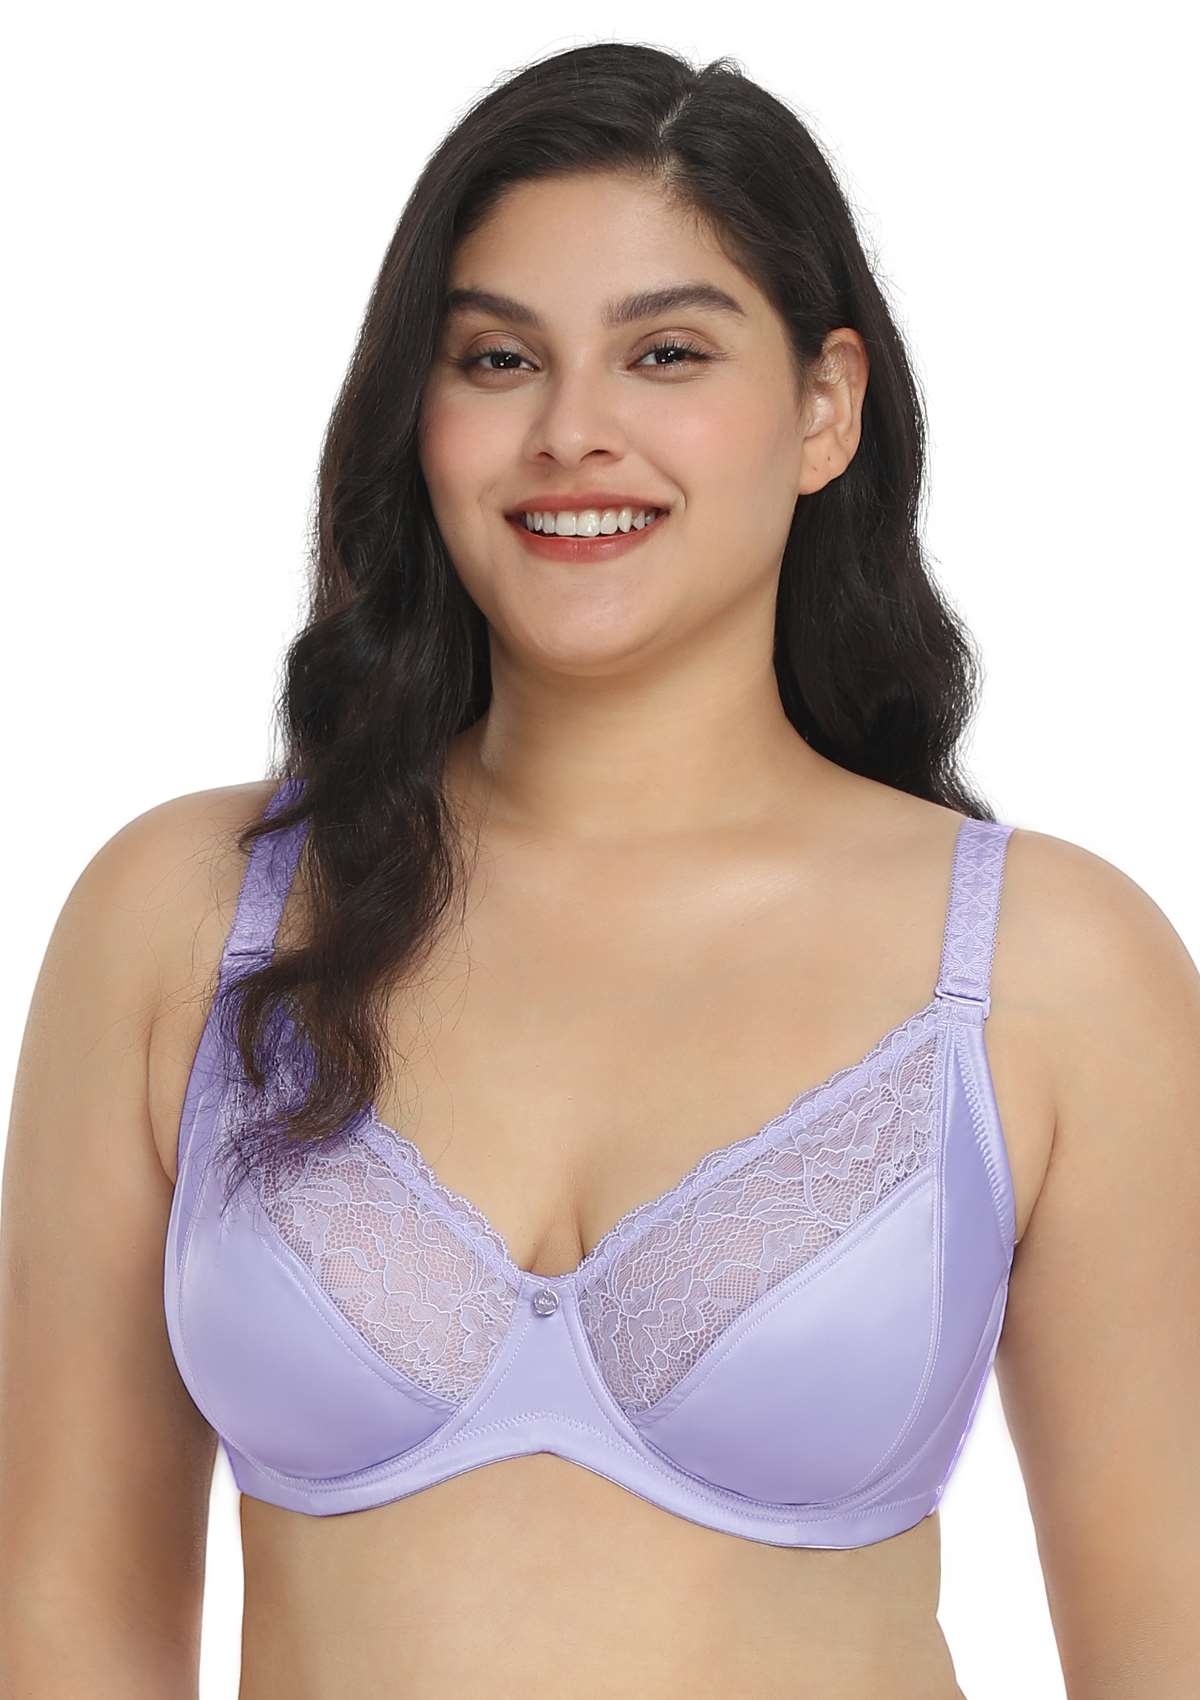 HSIA Foxy Satin Silky Full Coverage Underwire Bra With Floral Lace Trim - Purple / 44 / D